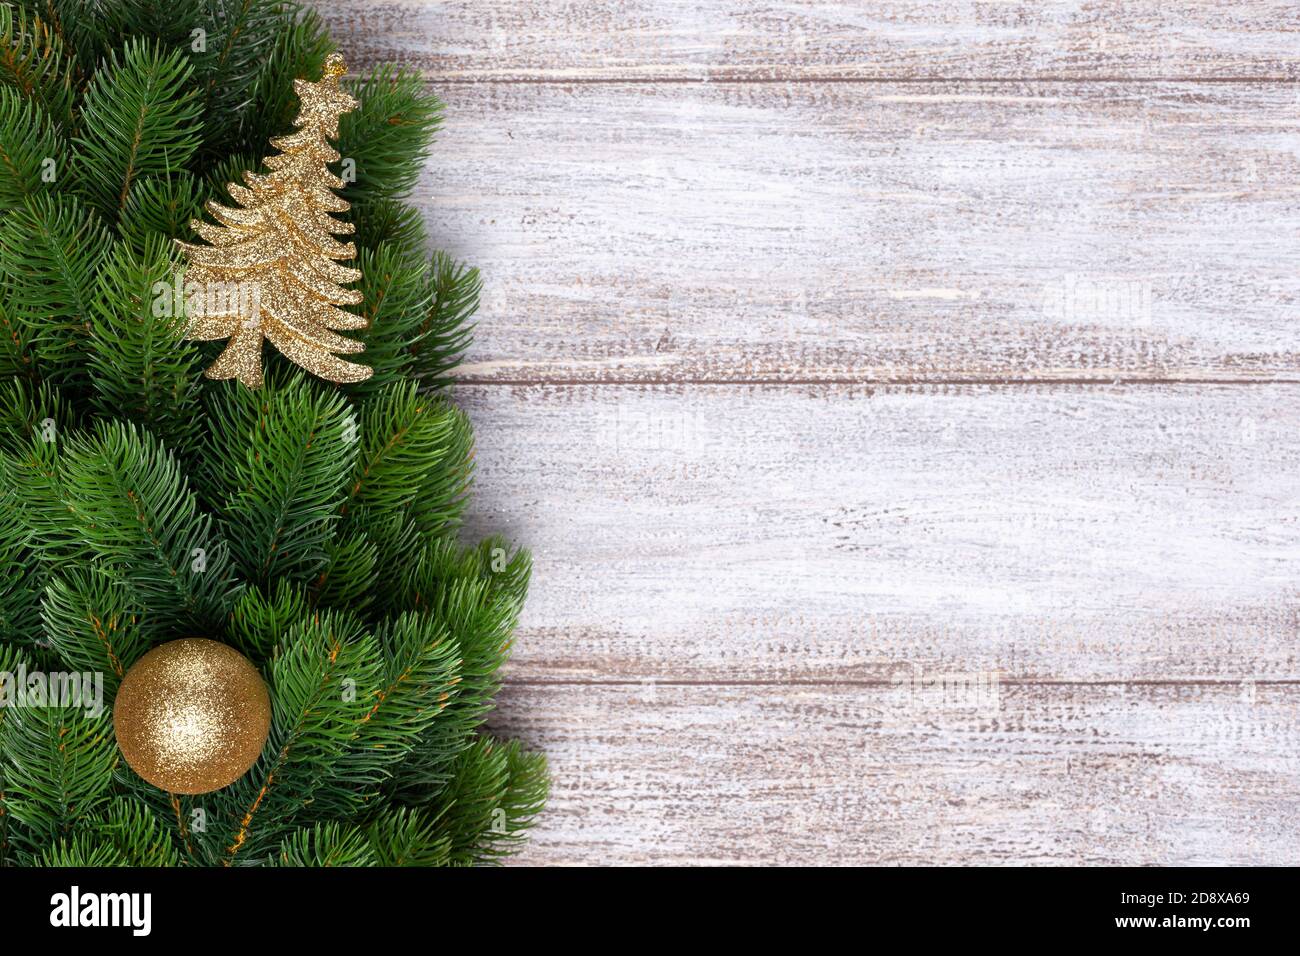 mock up, gold decorations on Christmas tree branches on a wooden background Stock Photo